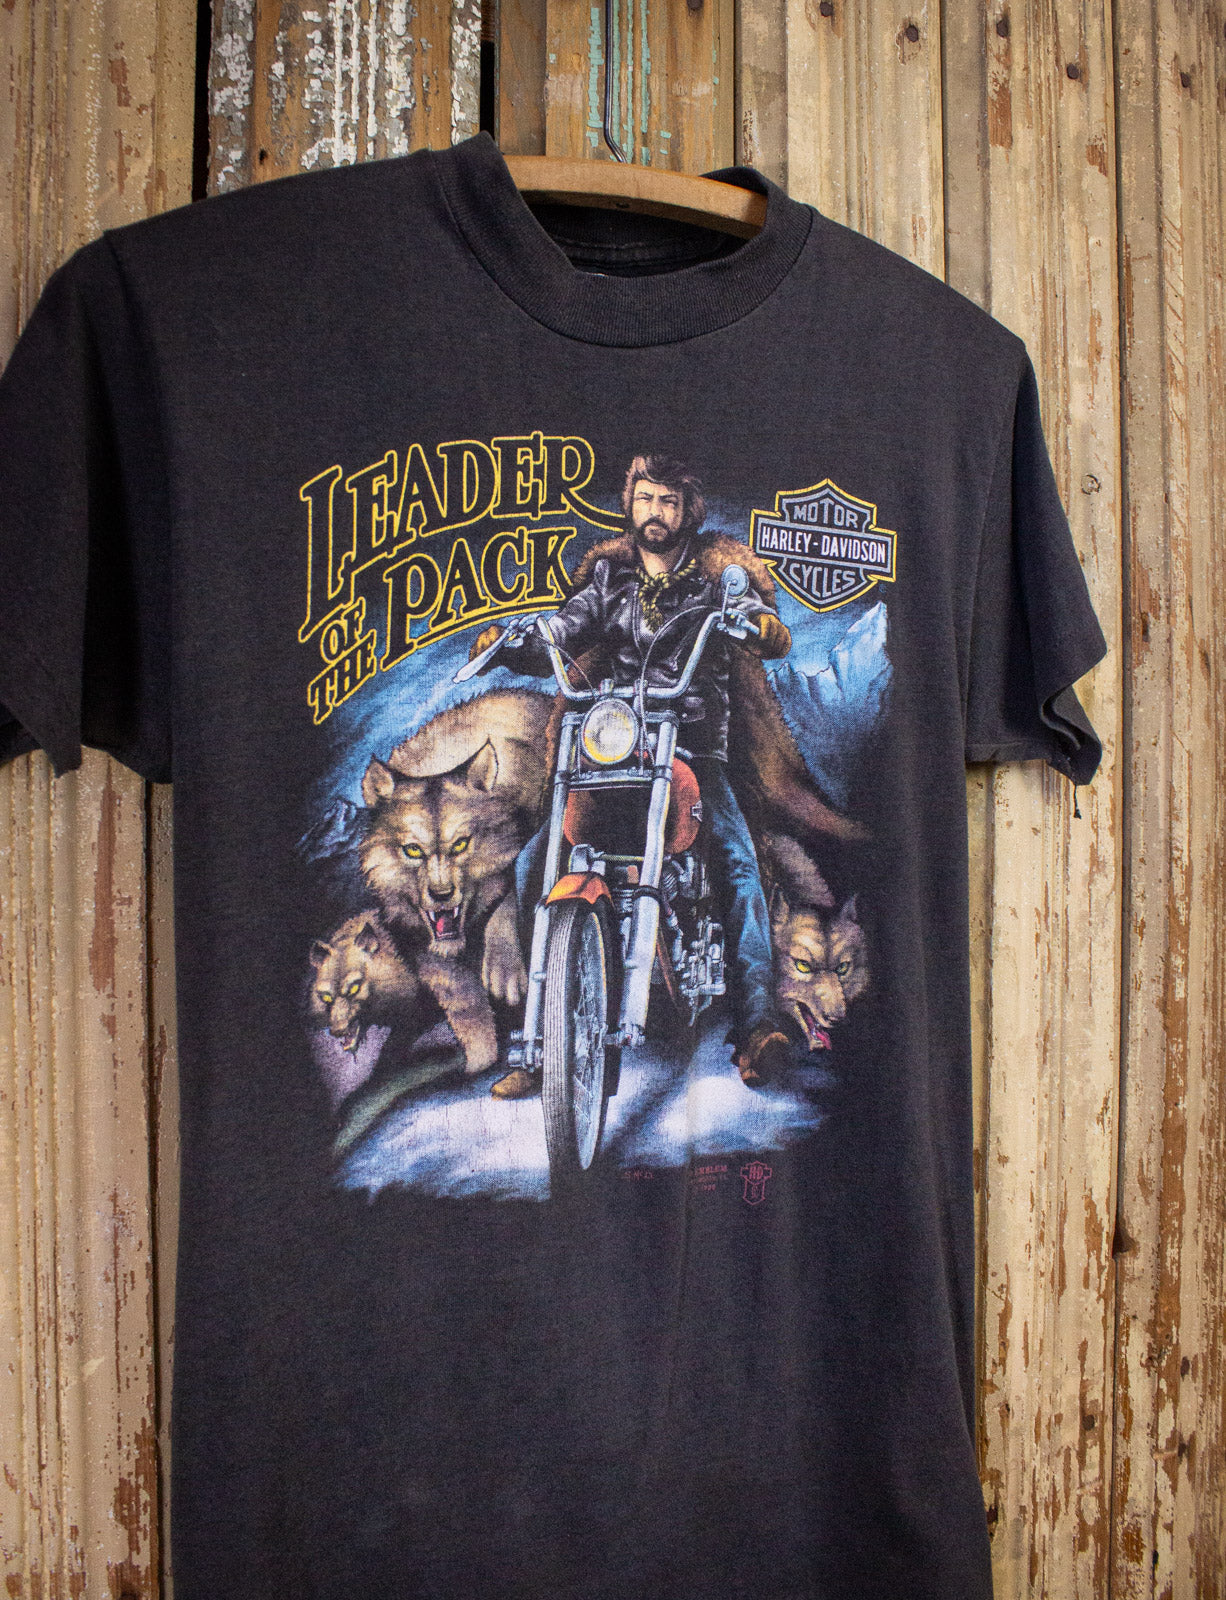 Vintage Harley Davidson Leader Of The Pack Graphic T Shirt 1988 Black Small